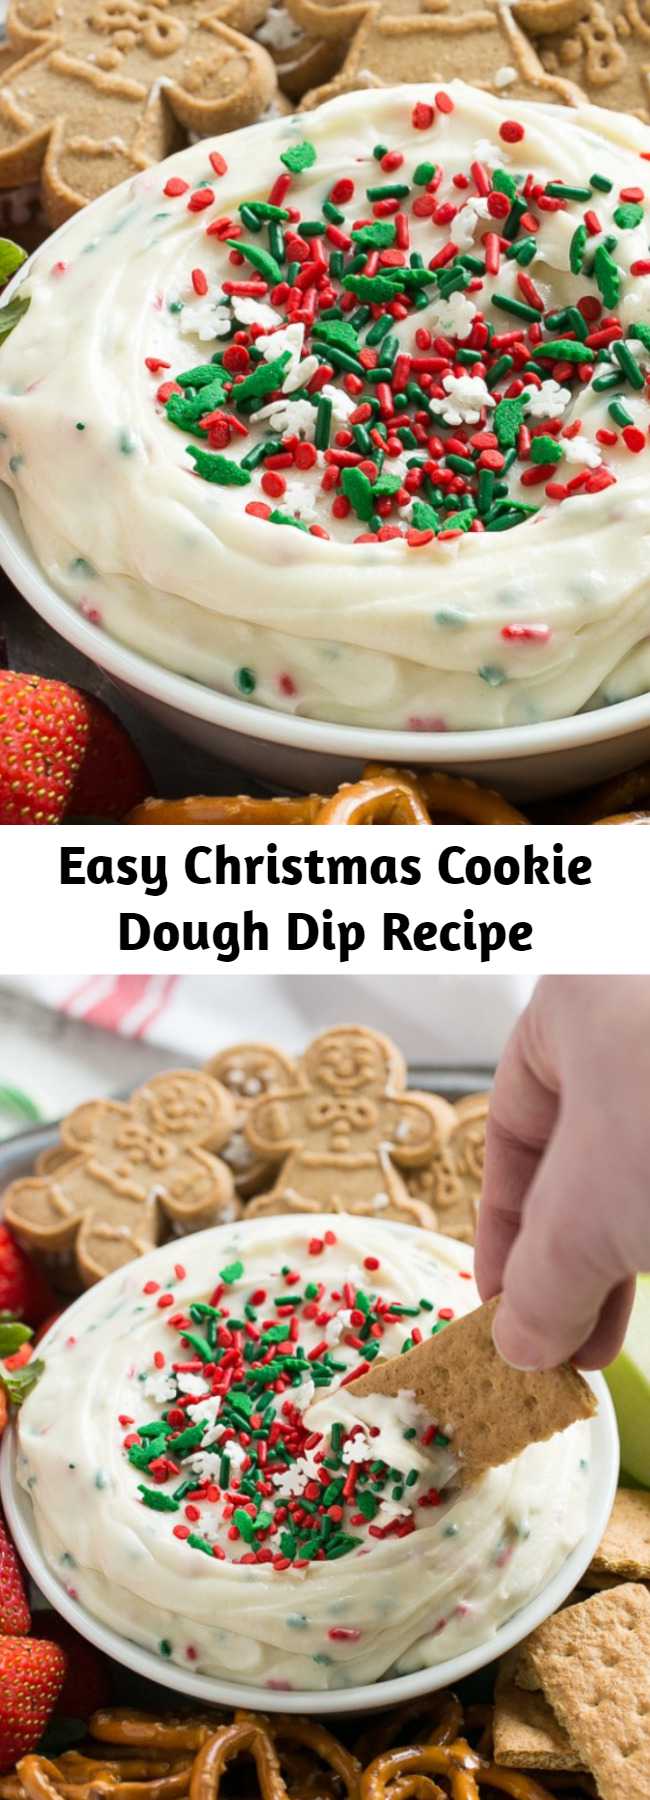 Easy Christmas Cookie Dough Dip Recipe - Looking for an easy and unique offering for your next holiday party? This cookie dough dip is sure to be a huge hit! This recipe for cookie dough dip has a fluffy and creamy base of eggless Christmas cookie dough that’s swirled with plenty of holiday sprinkles and served with fruit and cookies for dipping. It only takes 5 minutes to make!